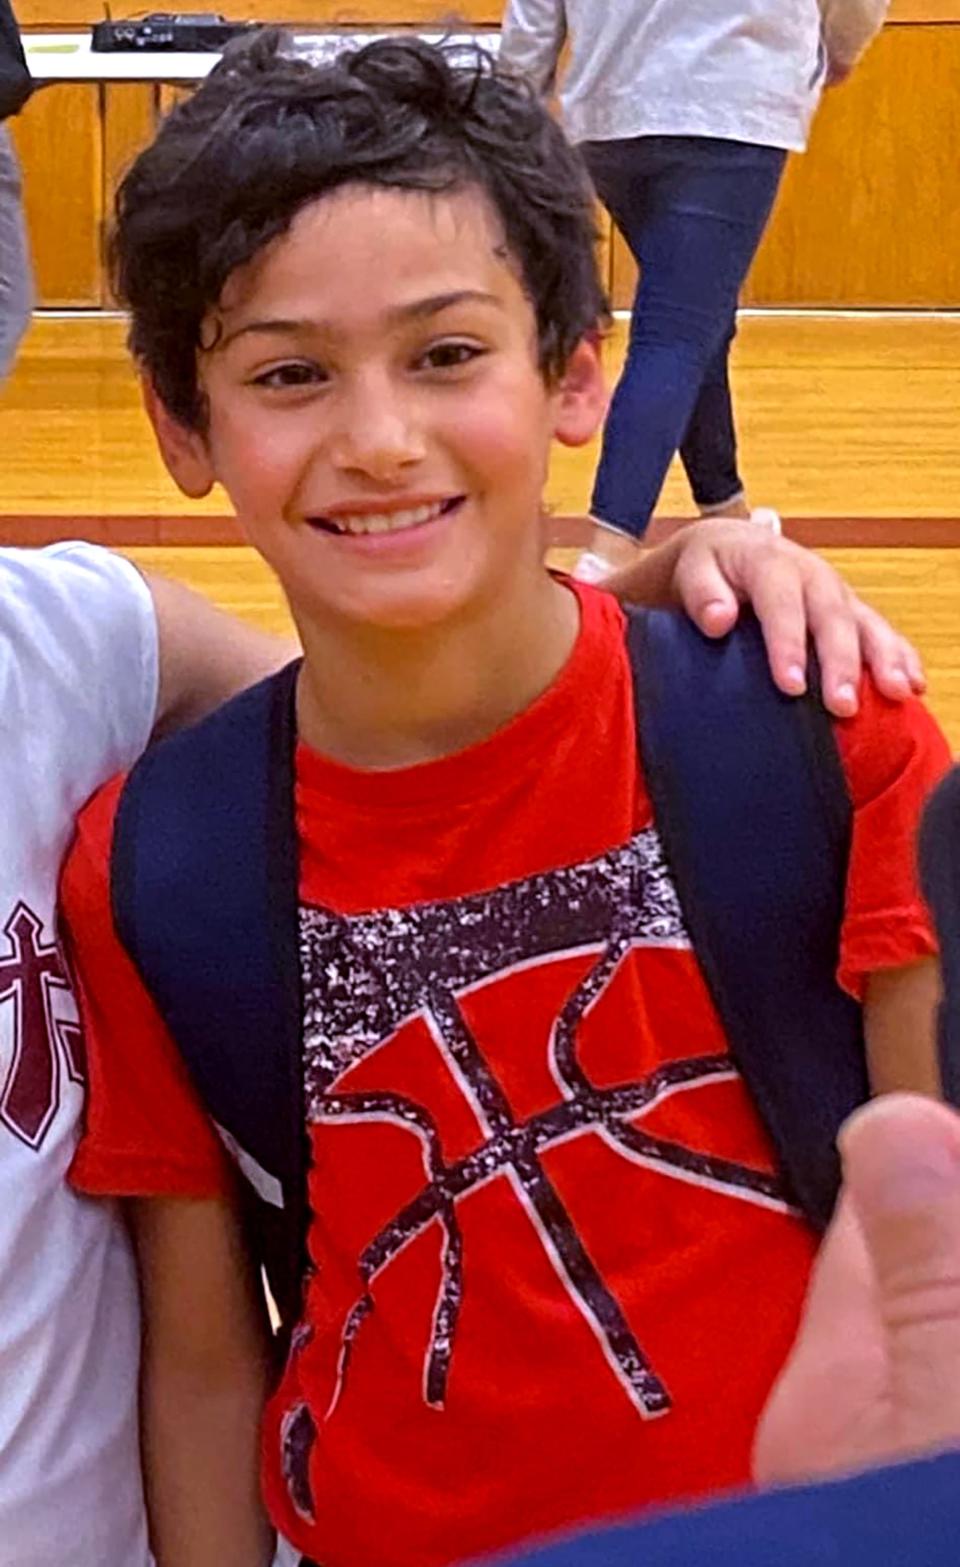 Yousuf Ayesh a student at Black Fox Elementary has died after battling brain cancer at Vanderbilt Children's hospital.